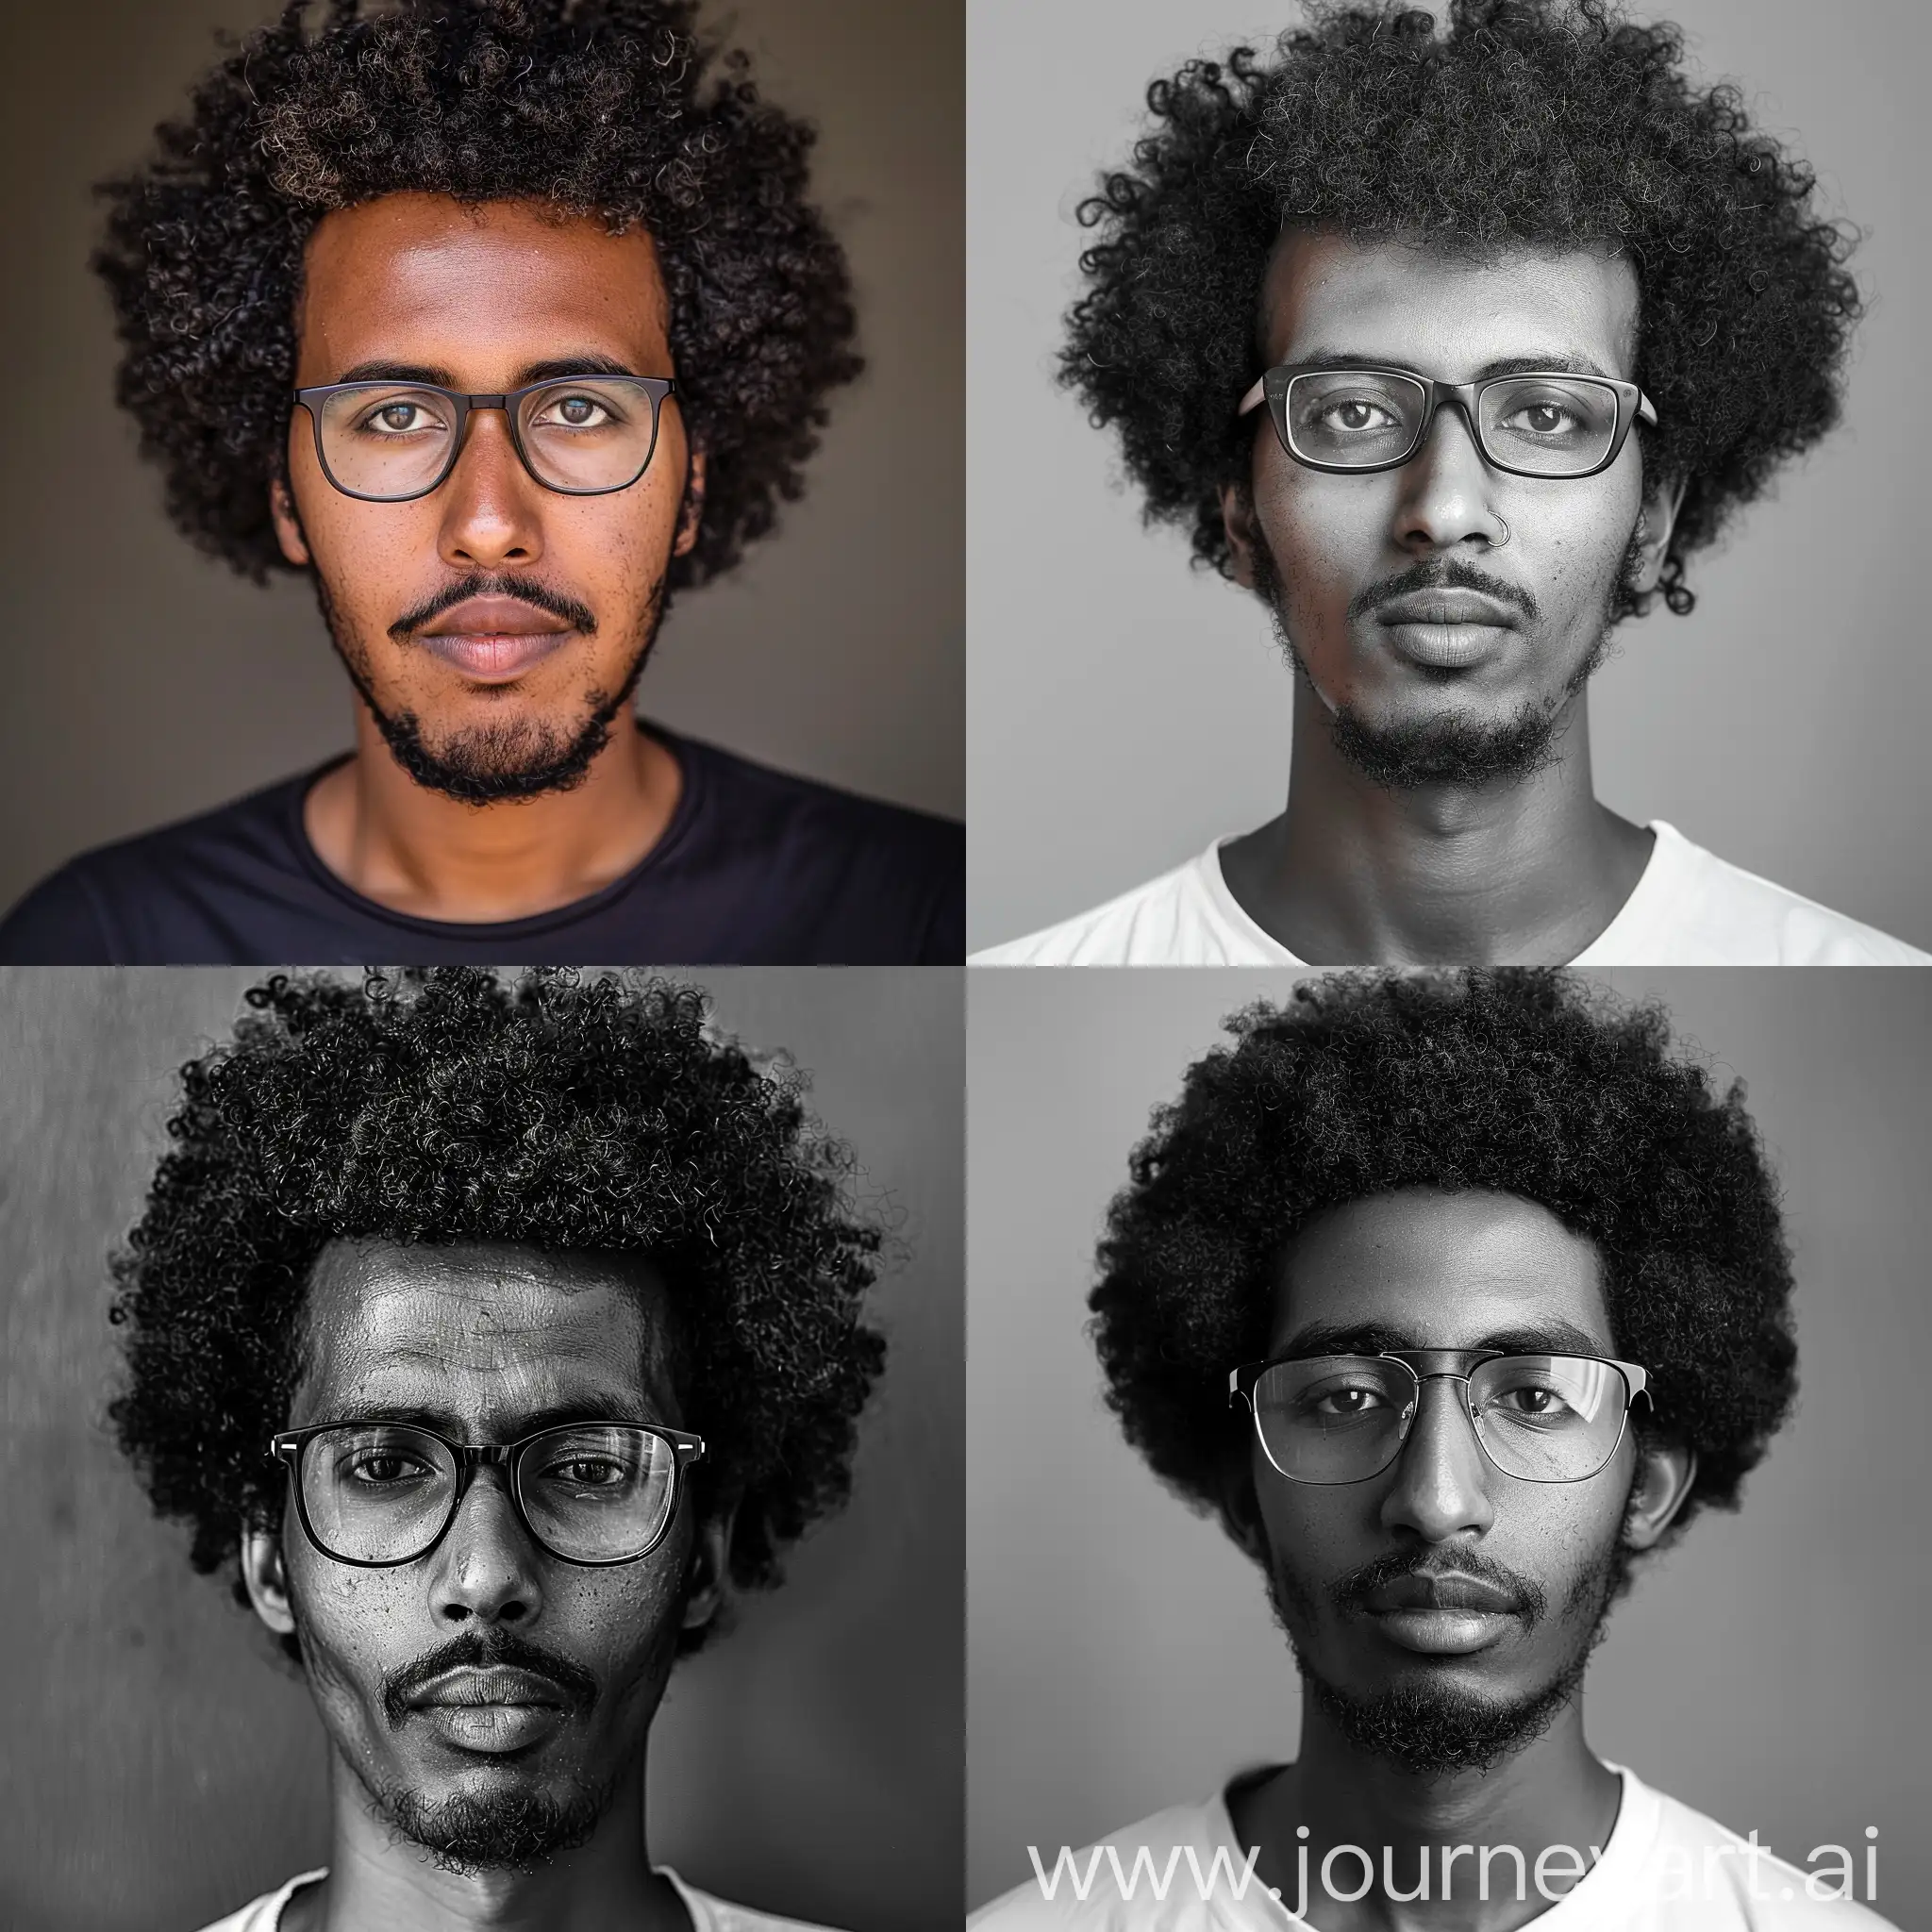 somalian man with a hook nose, and curly medium sized afro. dark but not very dark skin, rectangle  glasses. Chubby body frame, slighy pronounced jaw. 